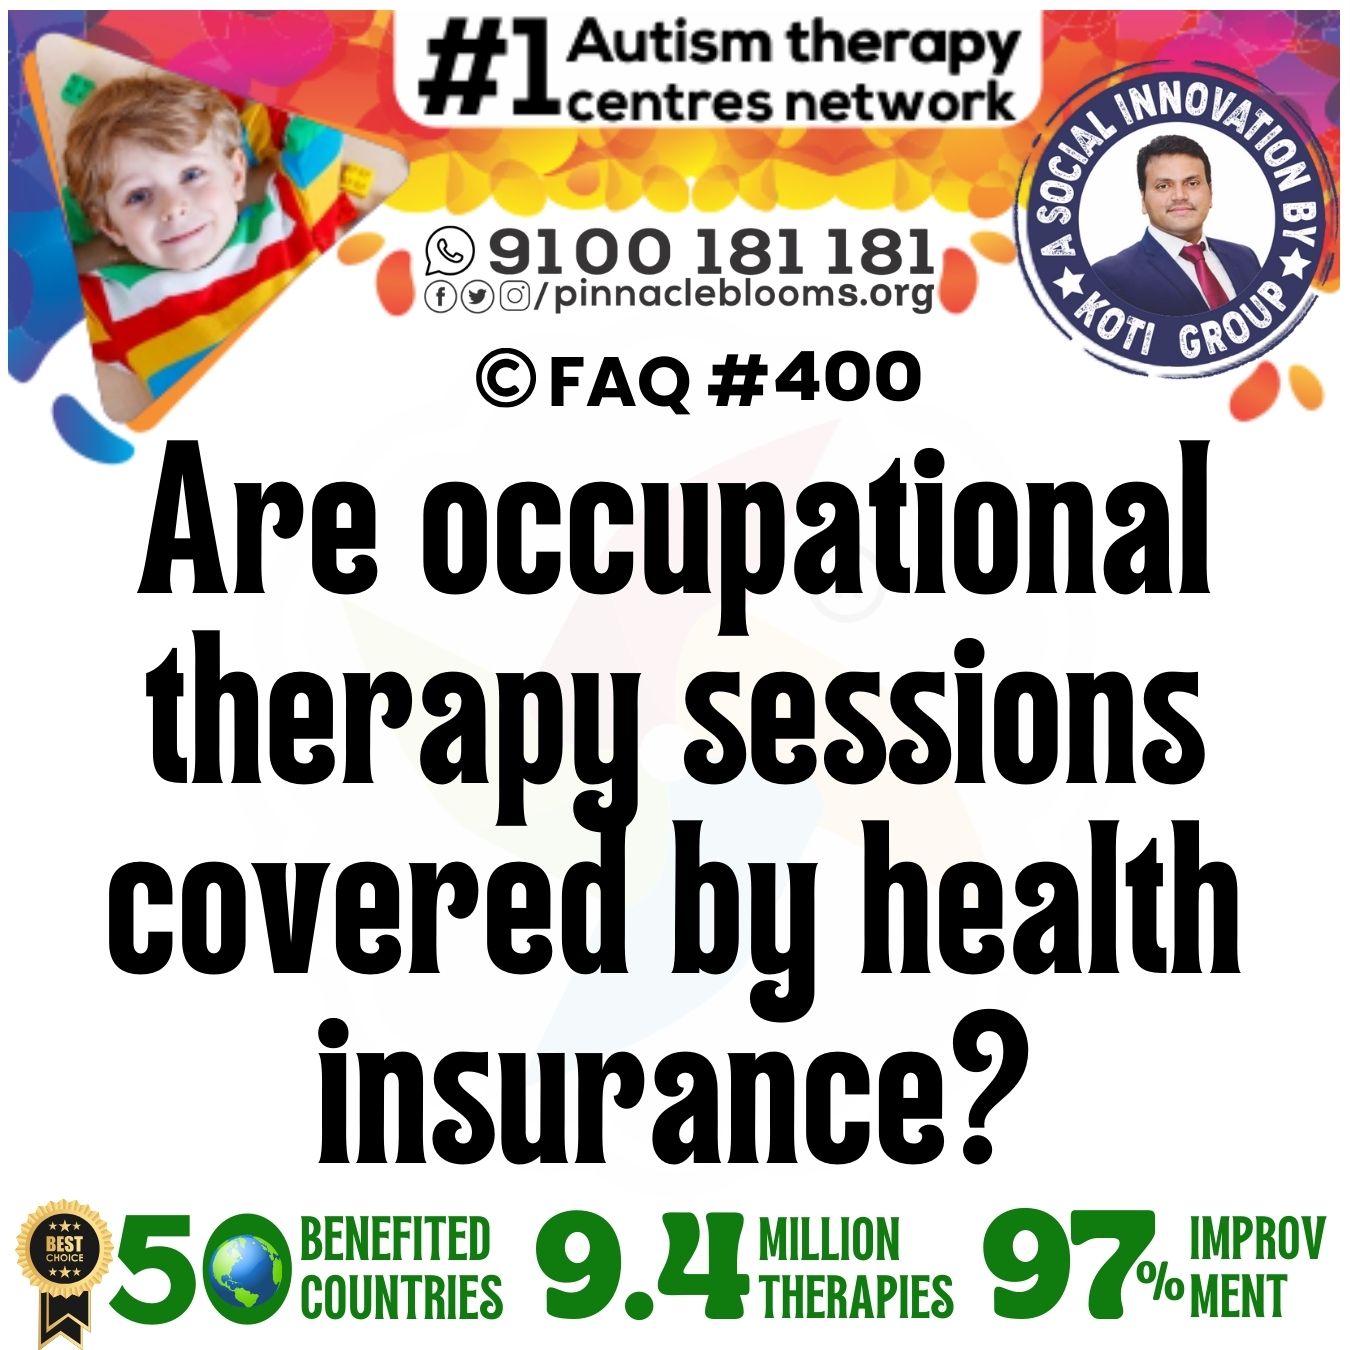 Are occupational therapy sessions covered by health insurance?